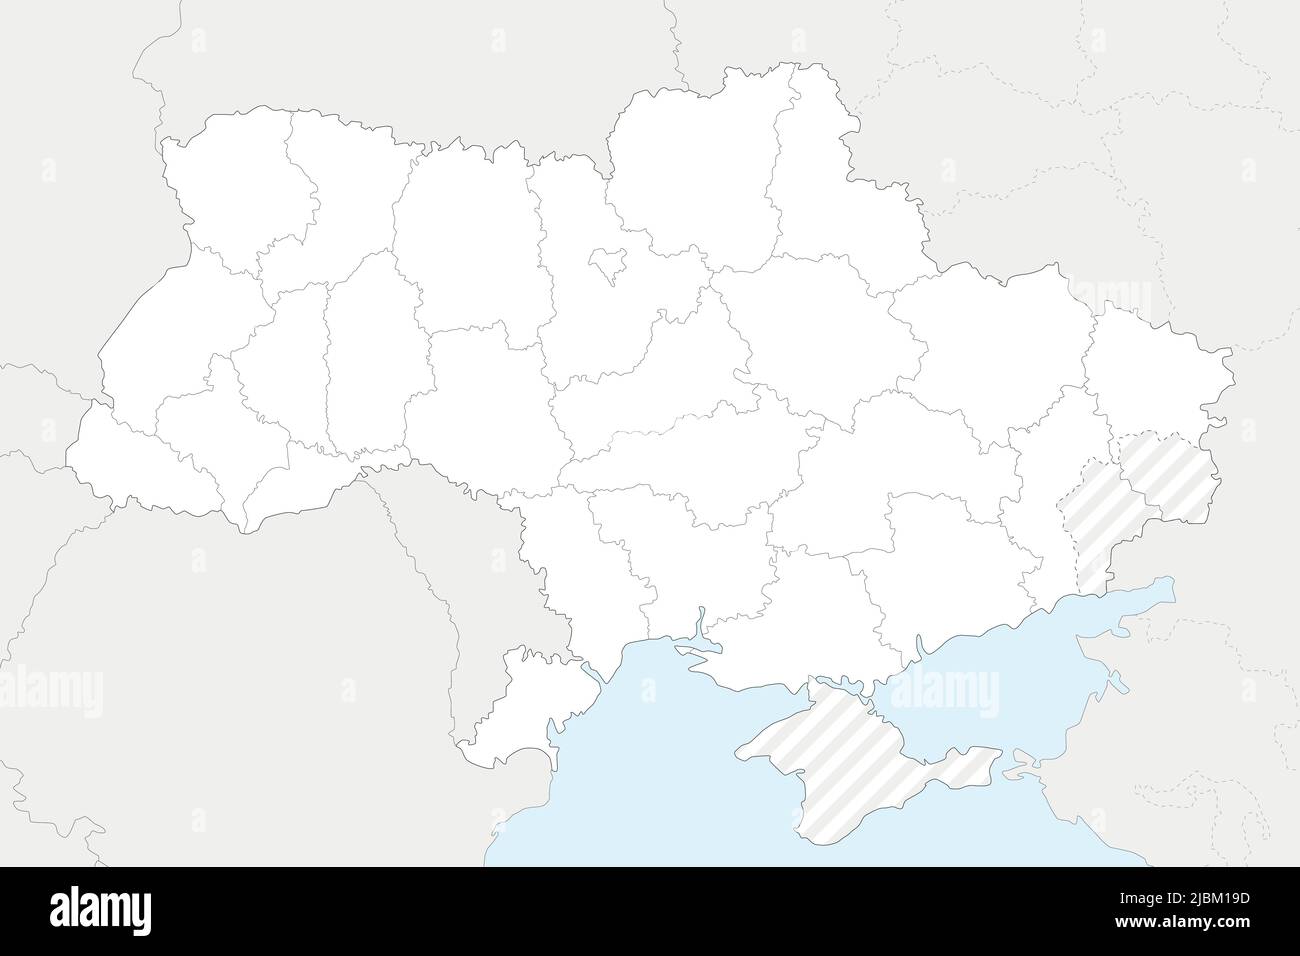 Blank map of Ukraine with regions, administrative divisions and territories claimed by Russia. Editable and clearly labeled layers. Stock Vector